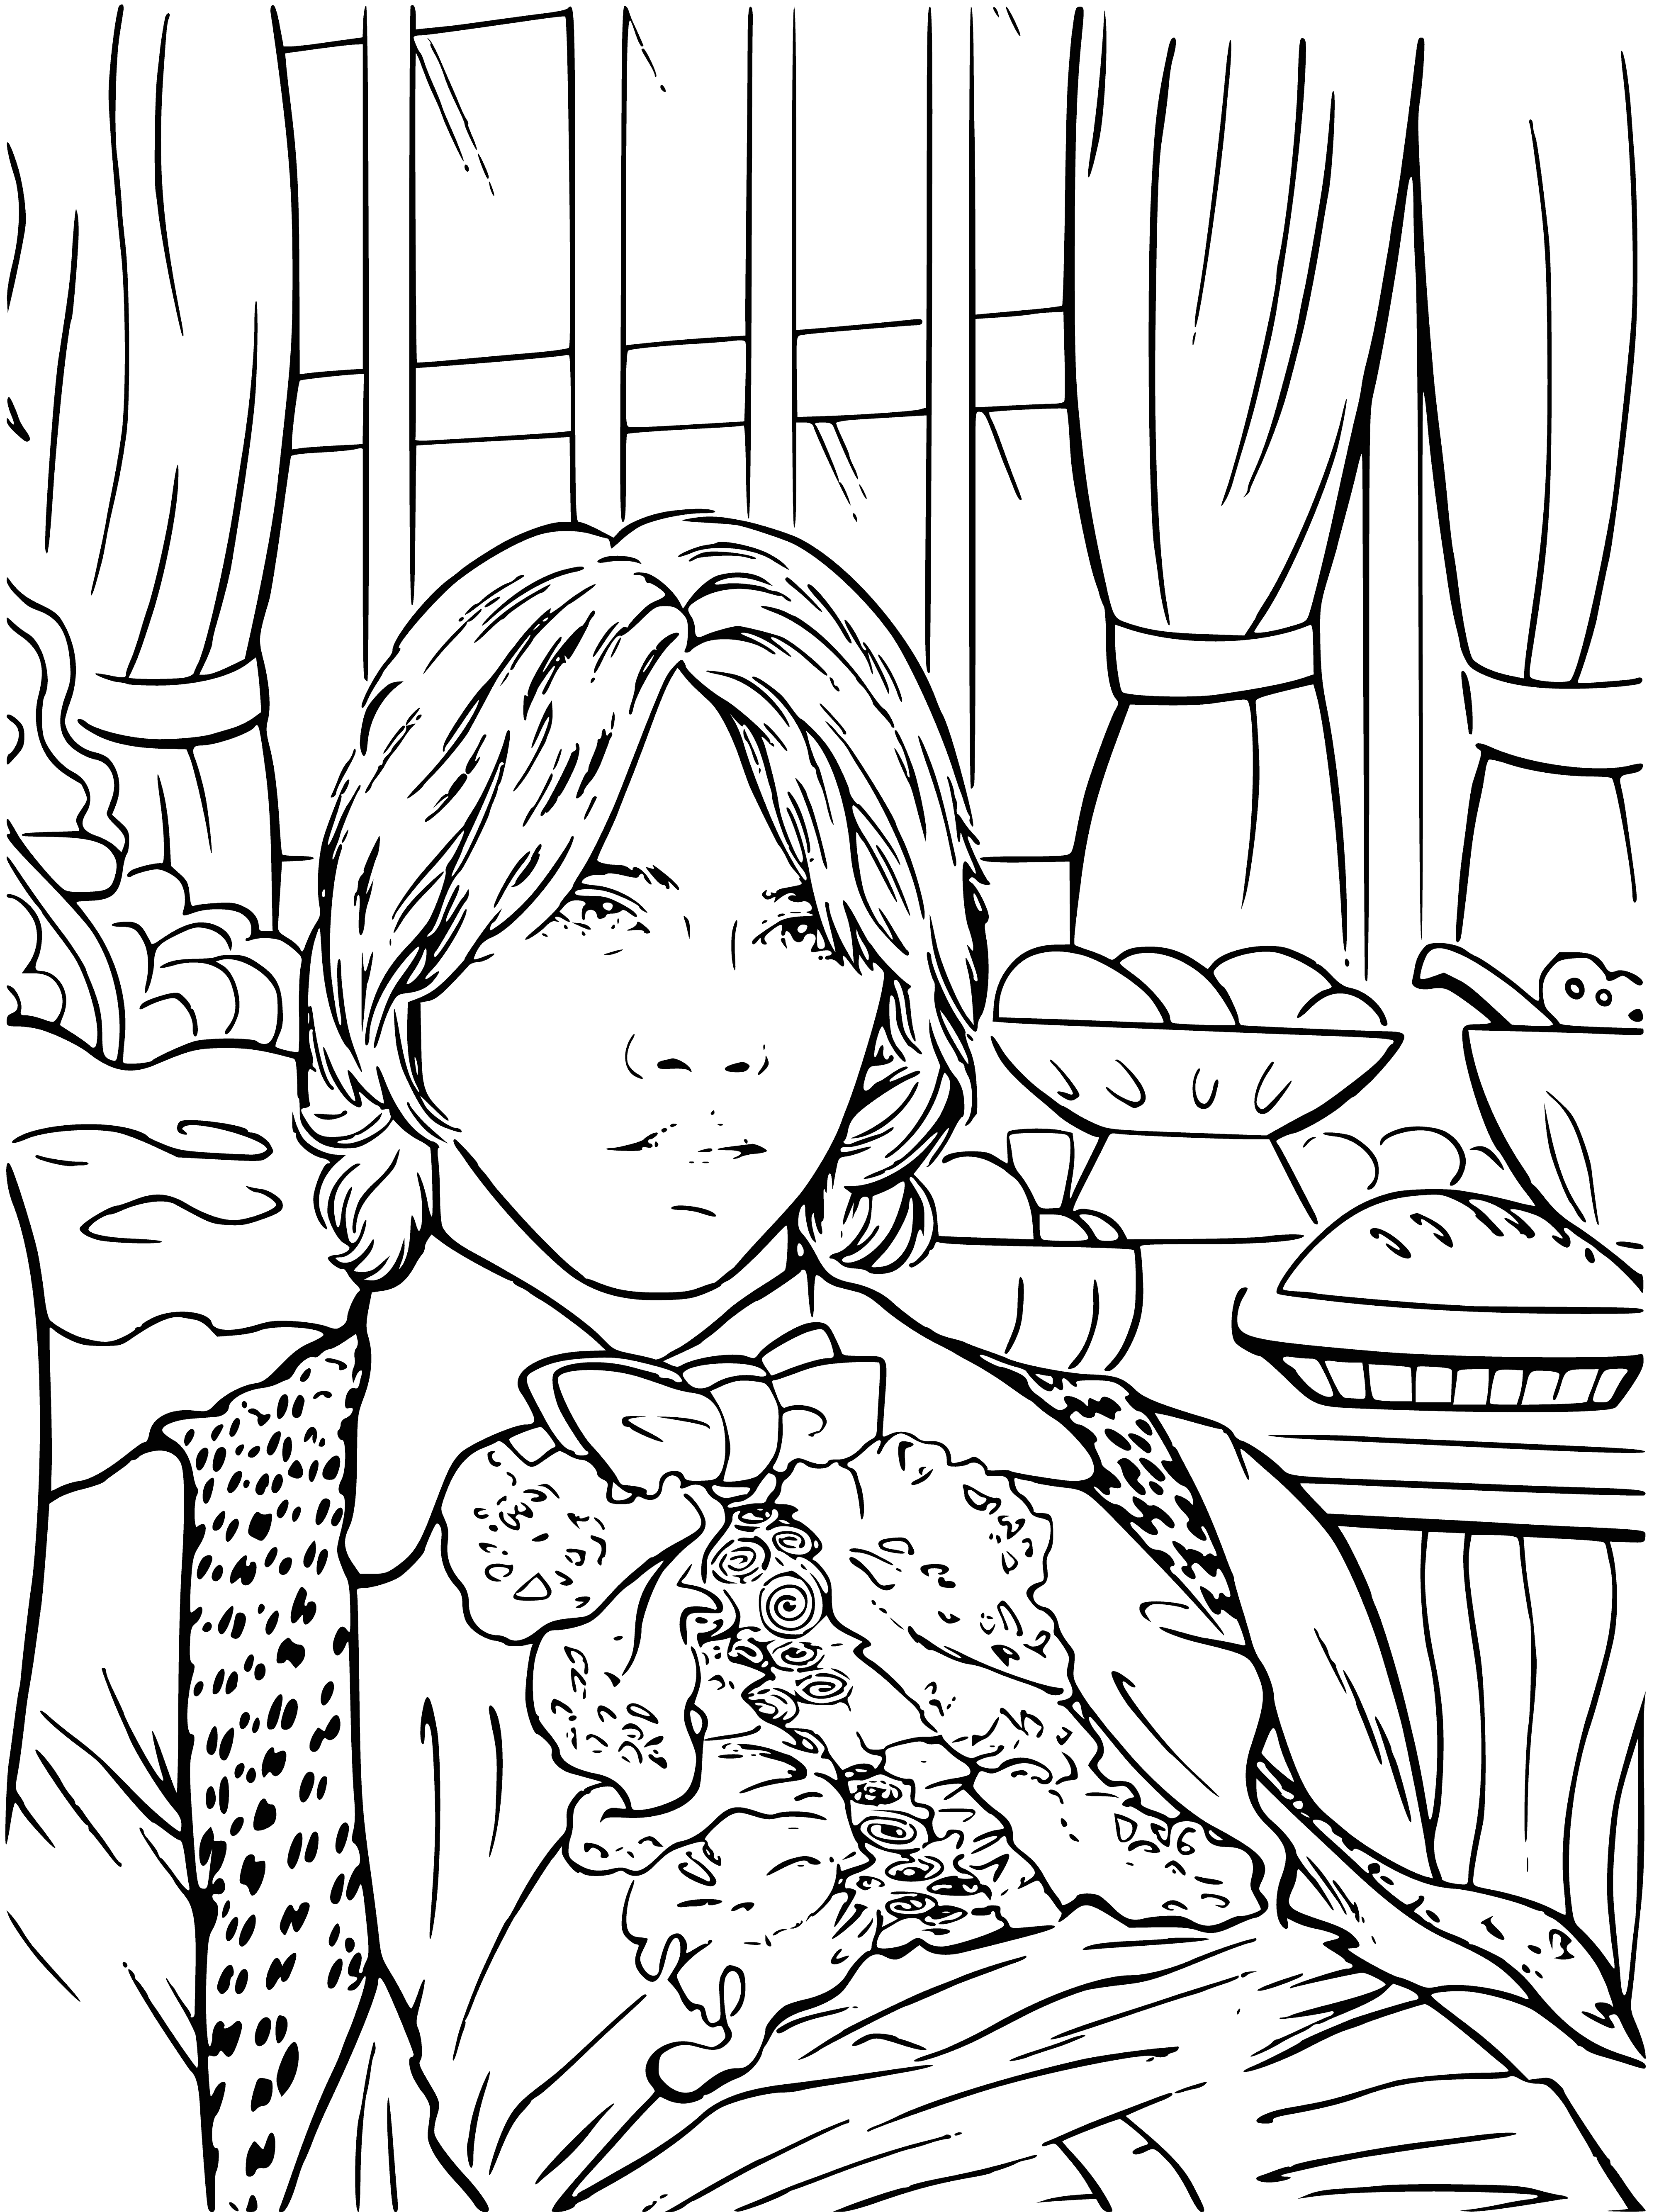 coloring page: Ron Weasley is an athletic redhead with glasses, wearing a Gryffindor scarf and ready to help Harry. #friendsforever